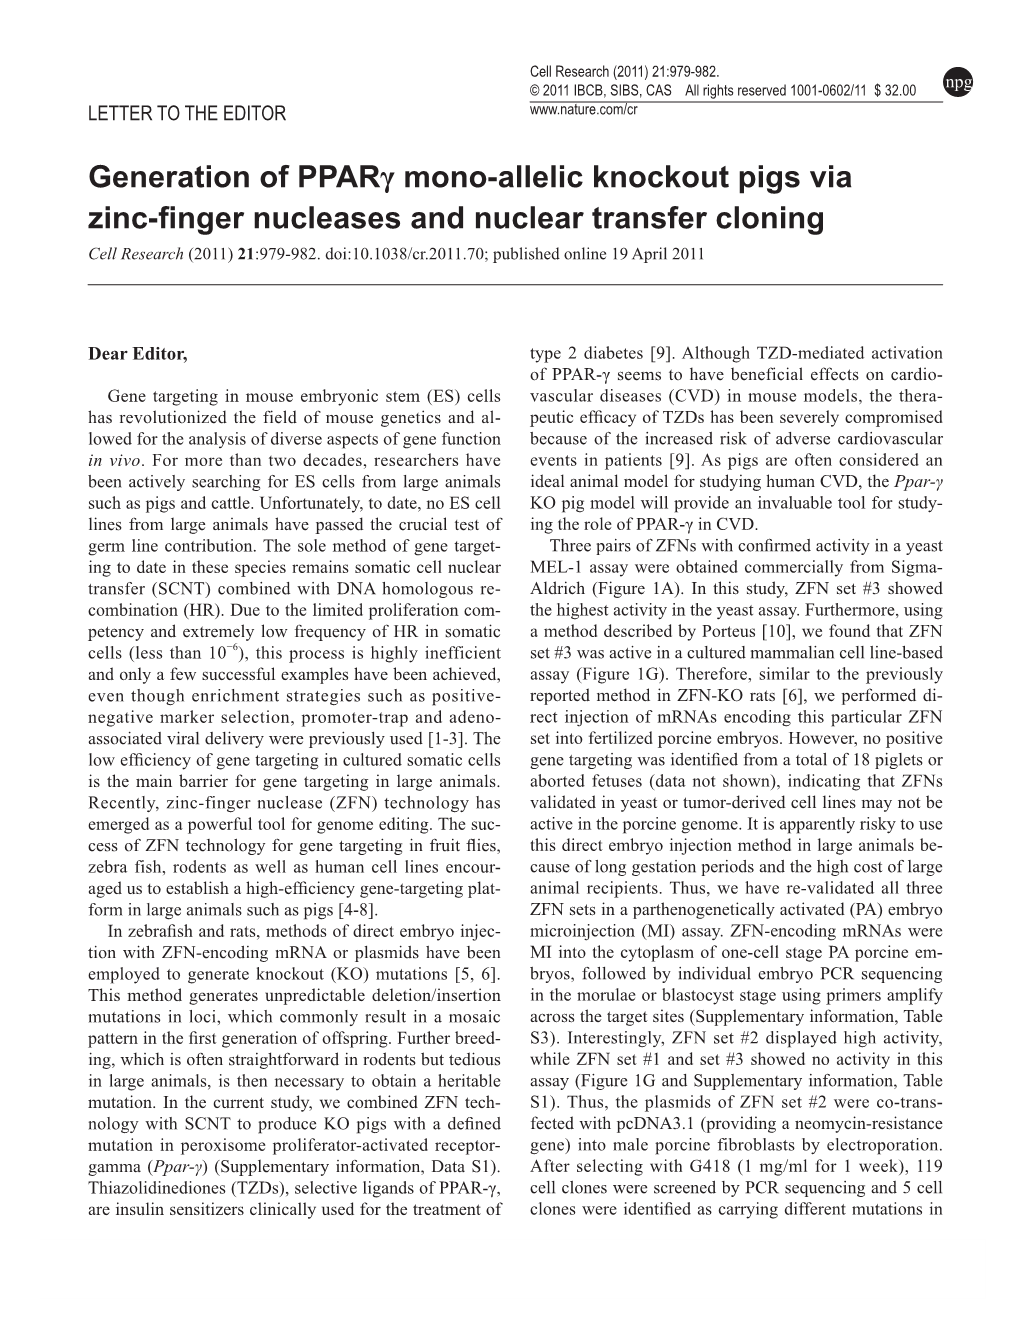 Generation of Pparγ Mono-Allelic Knockout Pigs Via Zinc-Finger Nucleases and Nuclear Transfer Cloning Cell Research (2011) 21:979-982